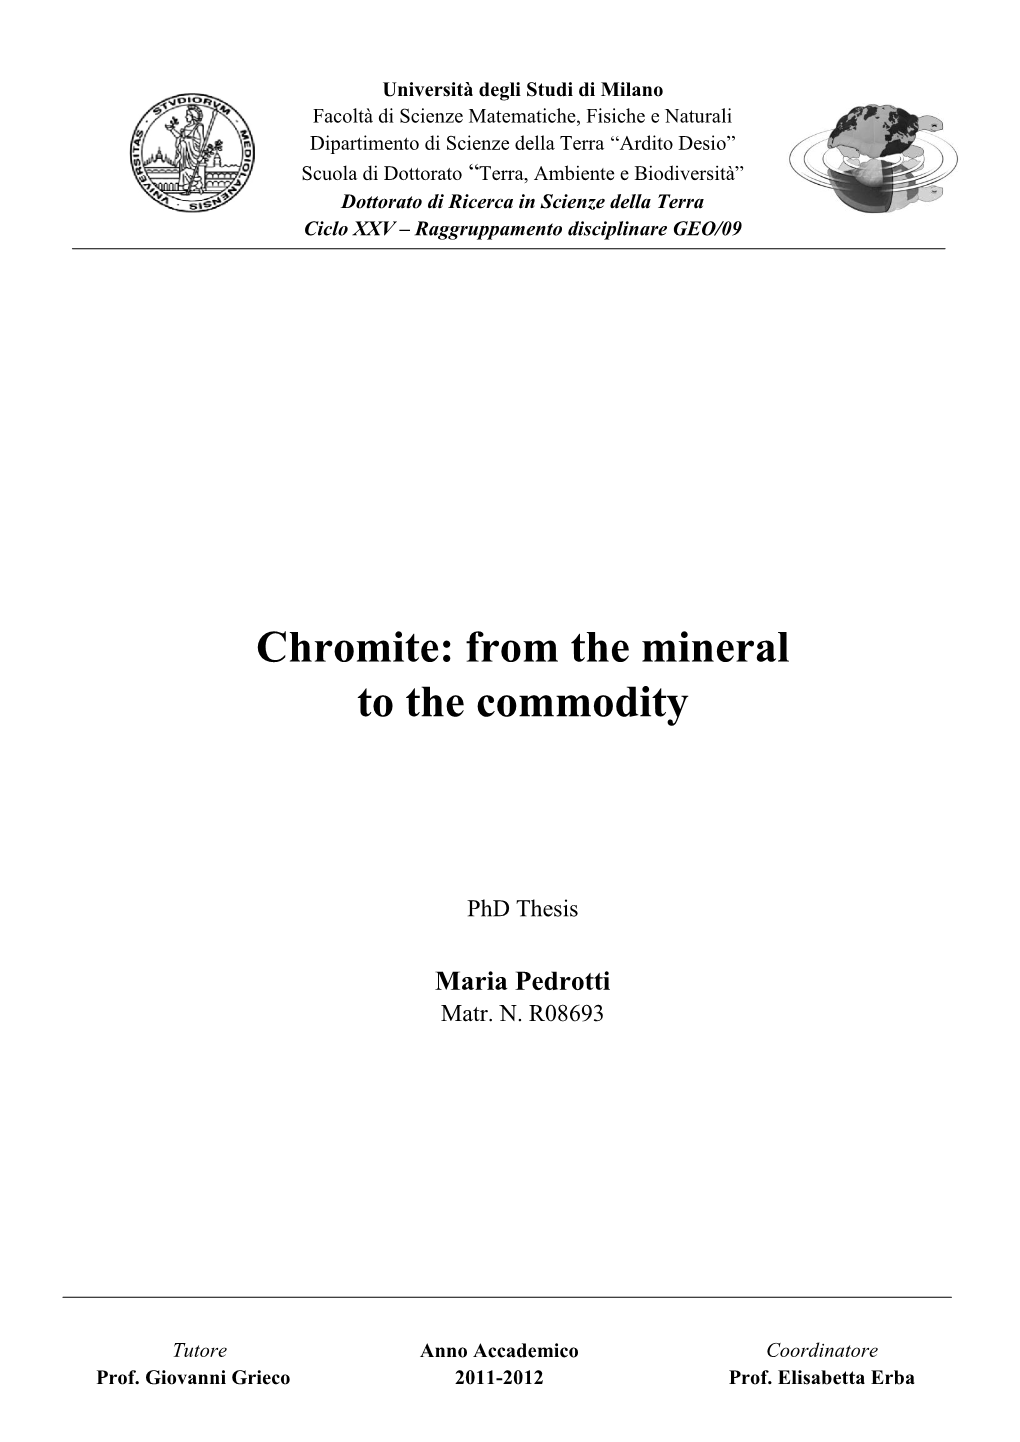 Chromite: from the Mineral to the Commodity